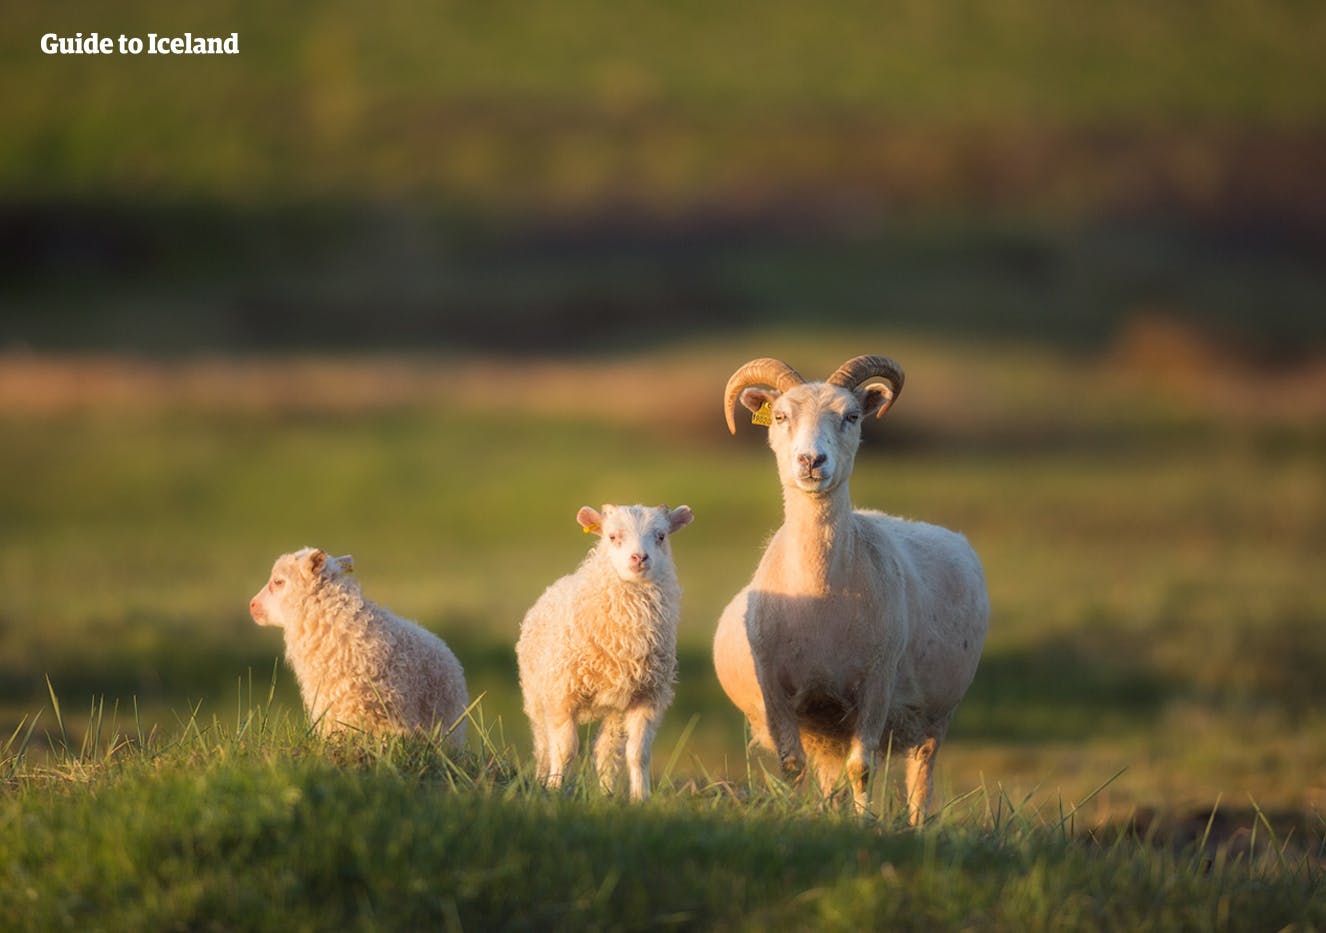 Keep an eye out for sheep as you travel around the Icelandic nature on your summer self-drive tour.